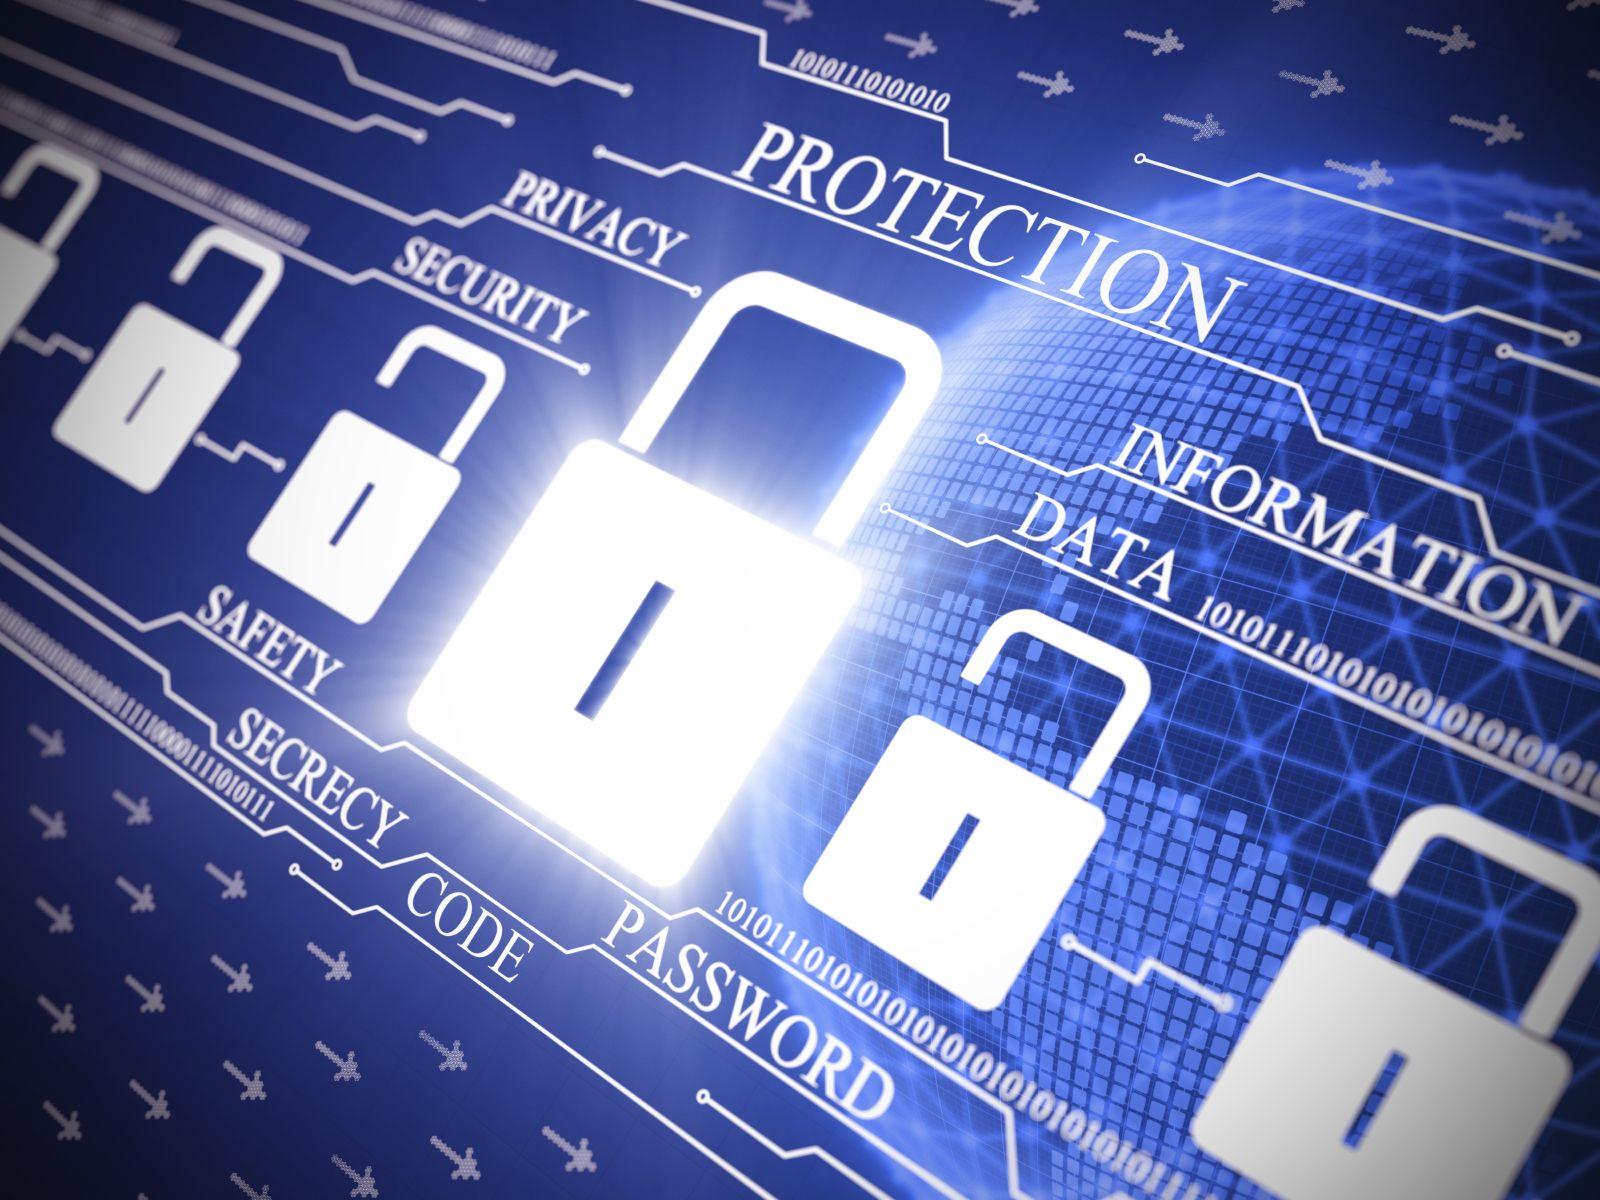 EDRM solutions to protect your corporate data